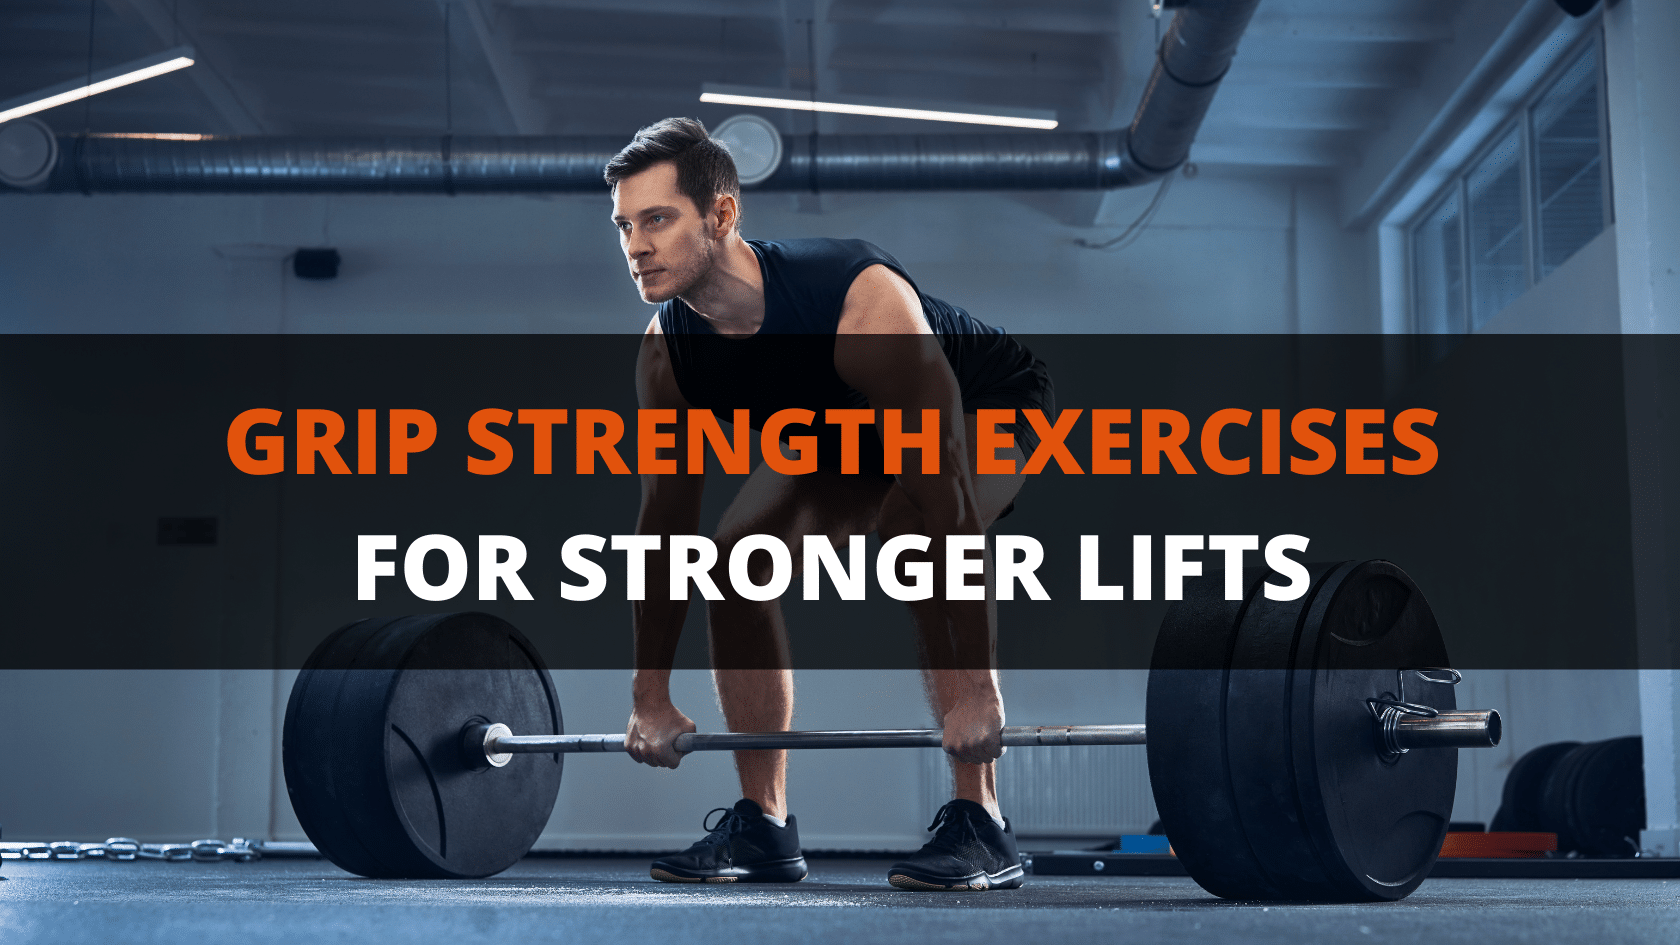 11 Best Grip Strength Exercises For Stronger Lifts